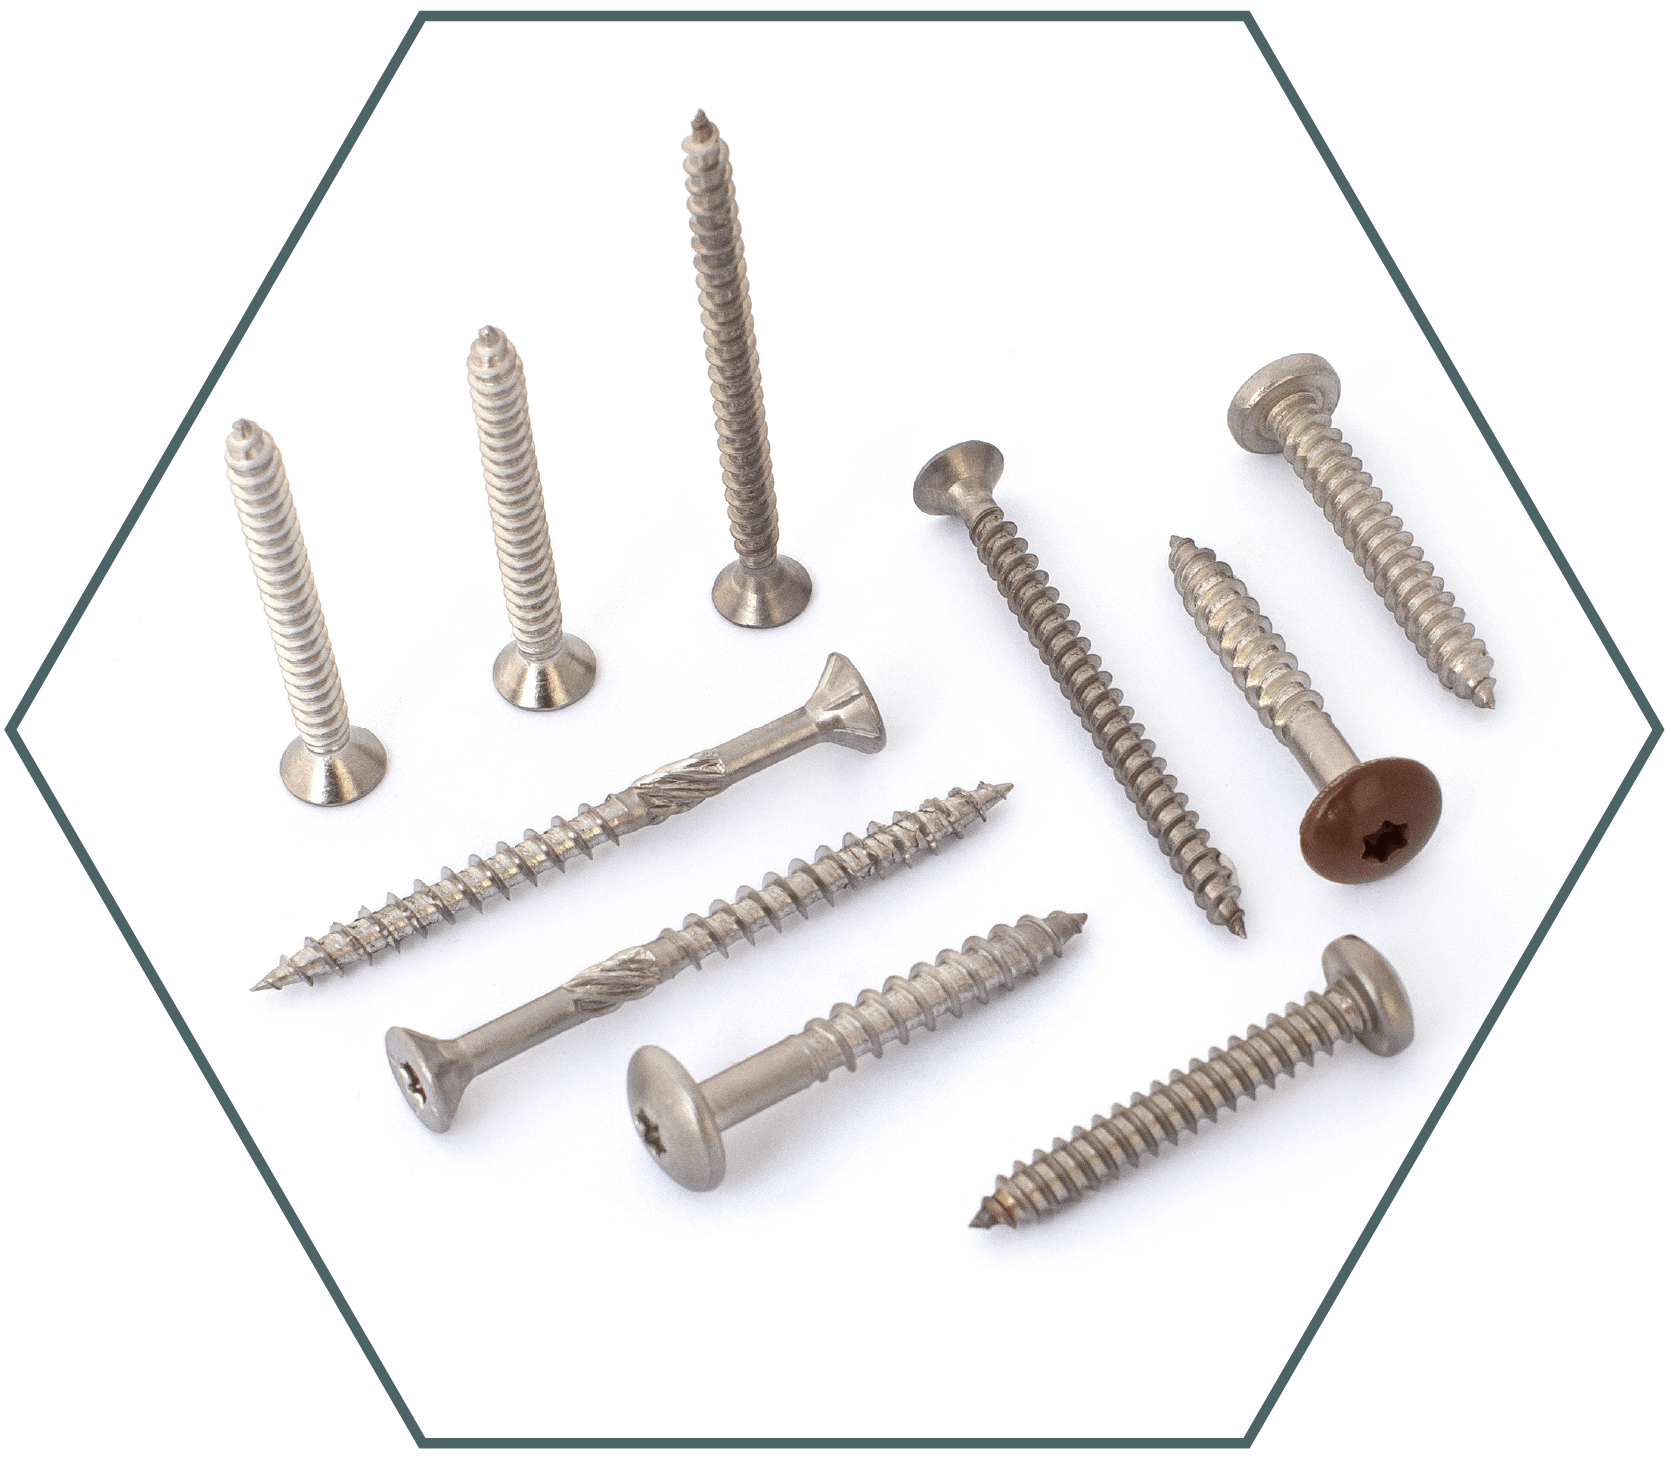 Fasteners specialists - Stainless steel screws